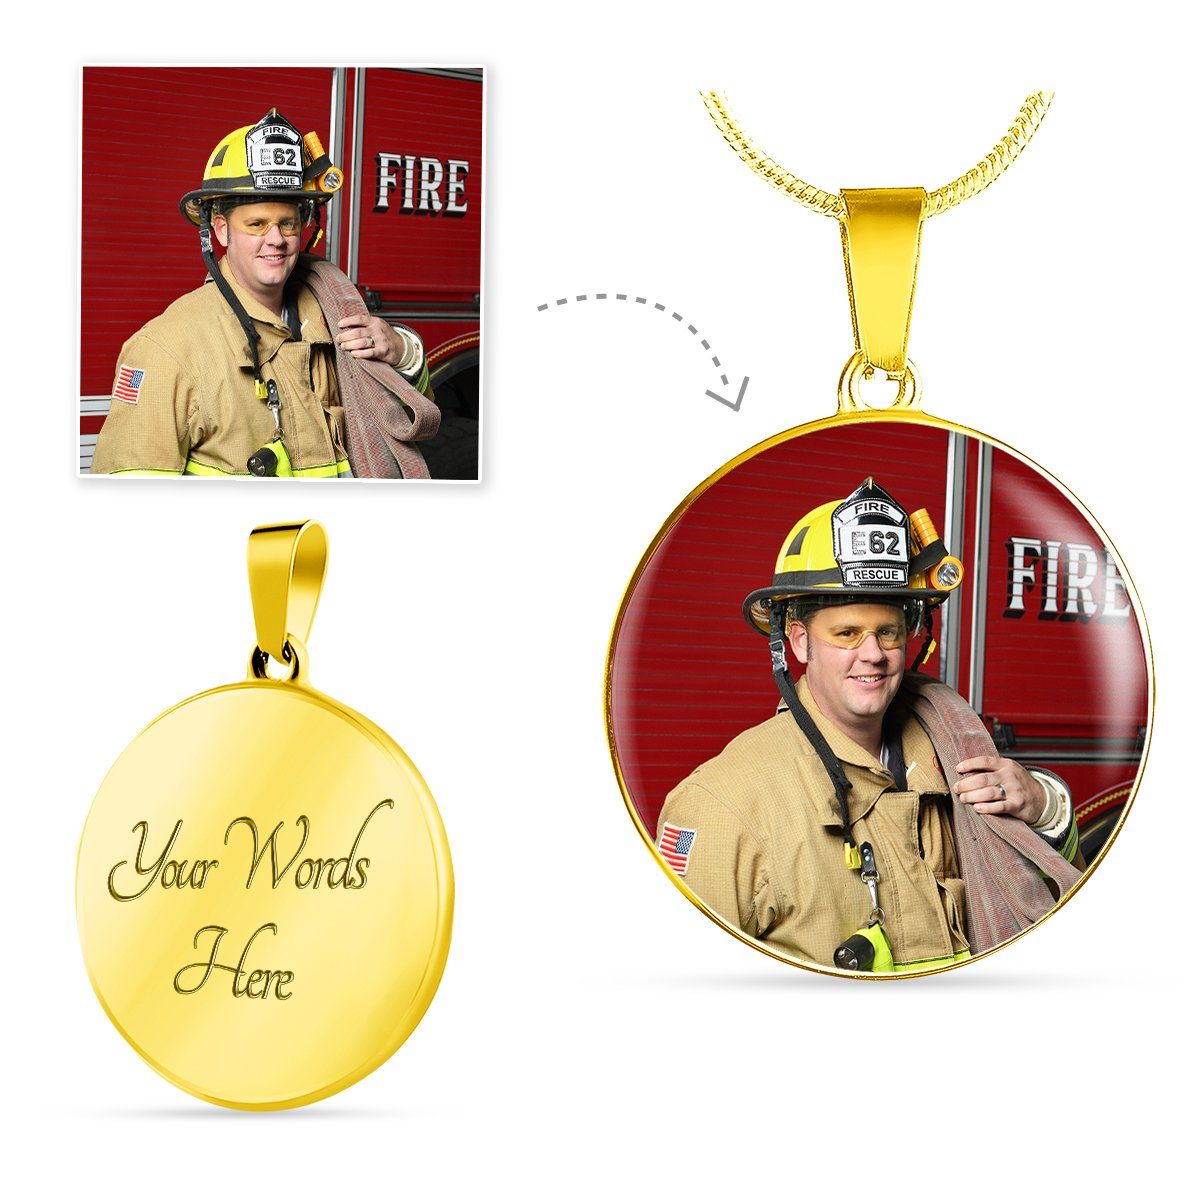 Firefighter Personalized Photo Circle Necklace - Heroic Defender